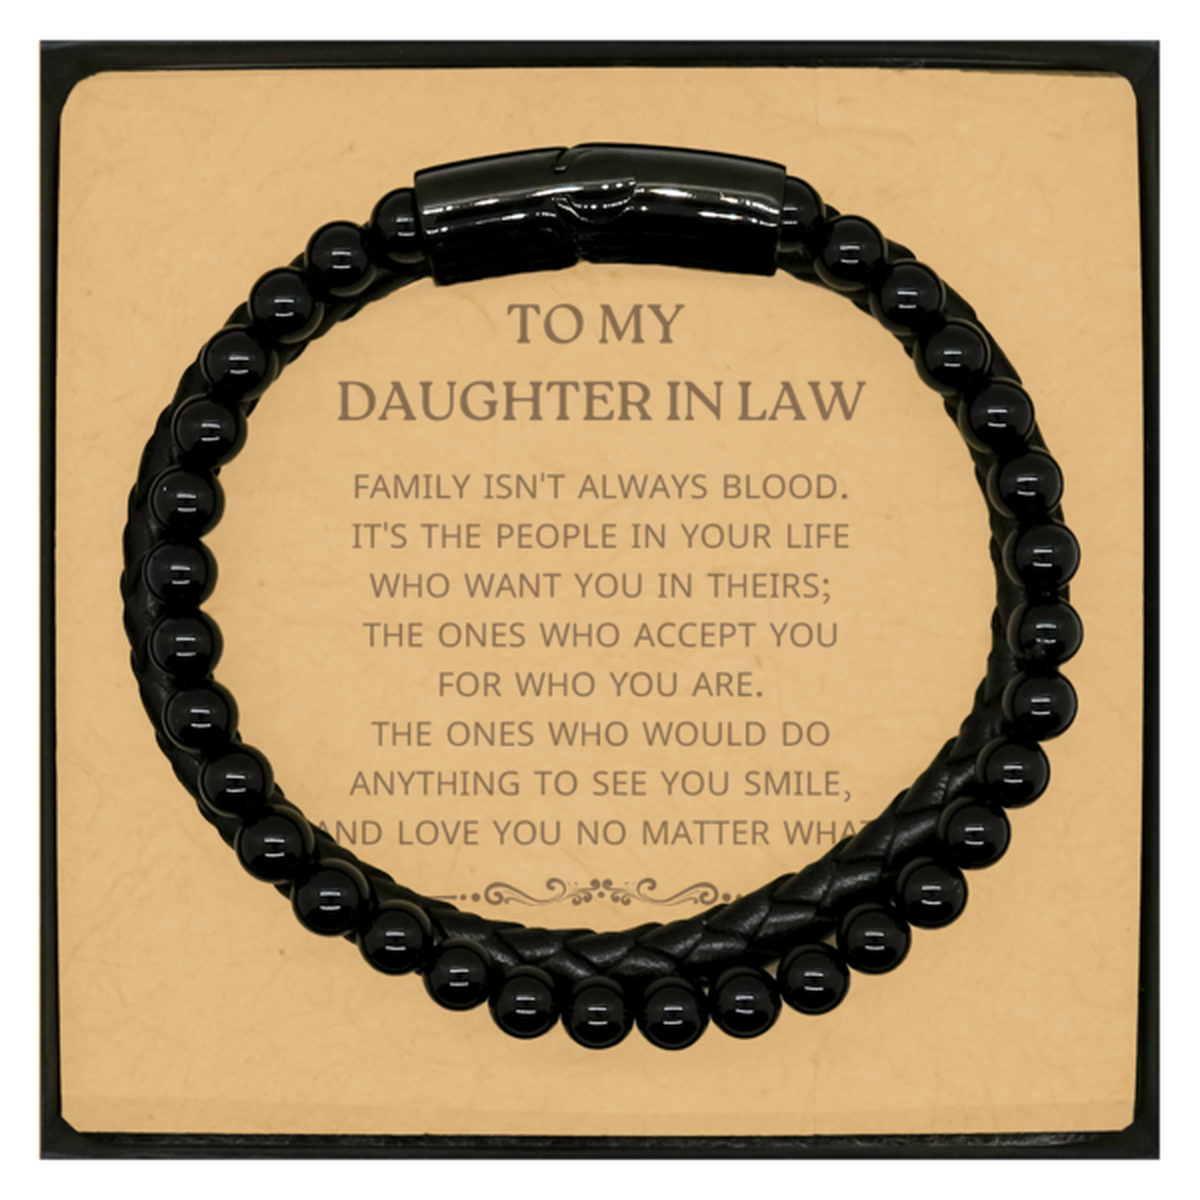 To My Daughter In Law Gifts, Family isn't always blood, Daughter In Law Stone Leather Bracelets, Birthday Christmas Unique Present For Daughter In Law